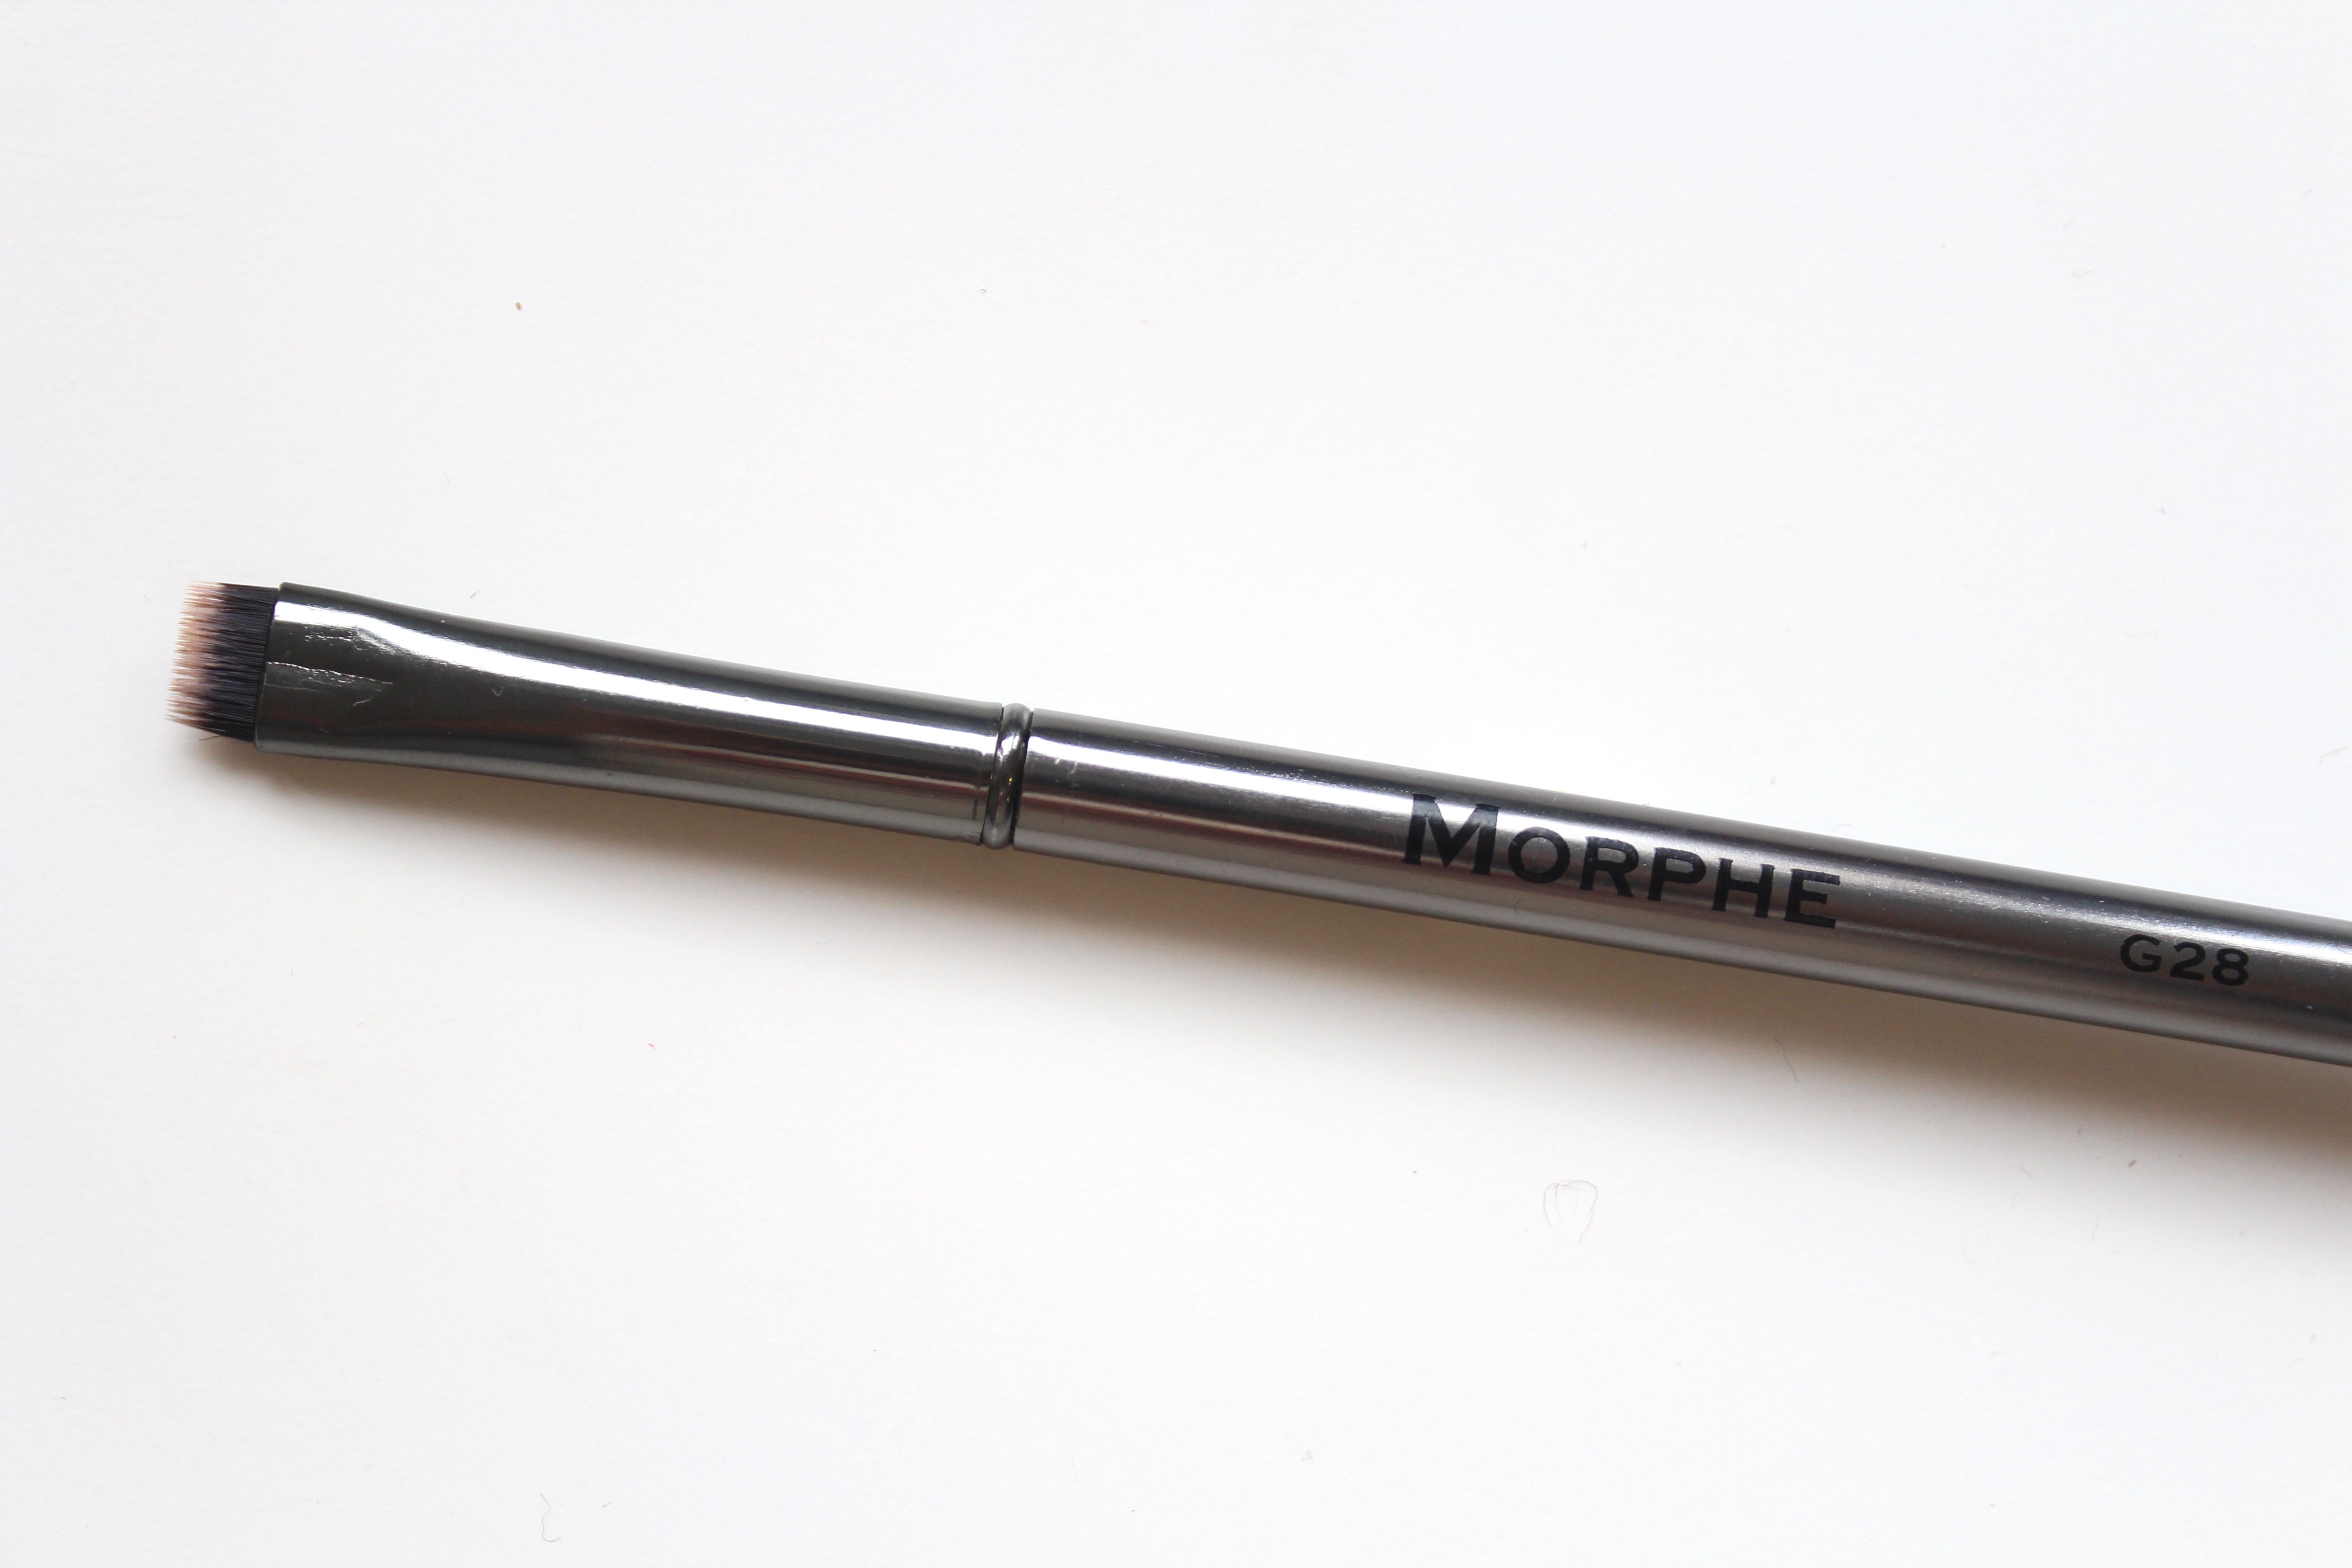 Morphe G28 Flat Definer review by Facemadeup.com